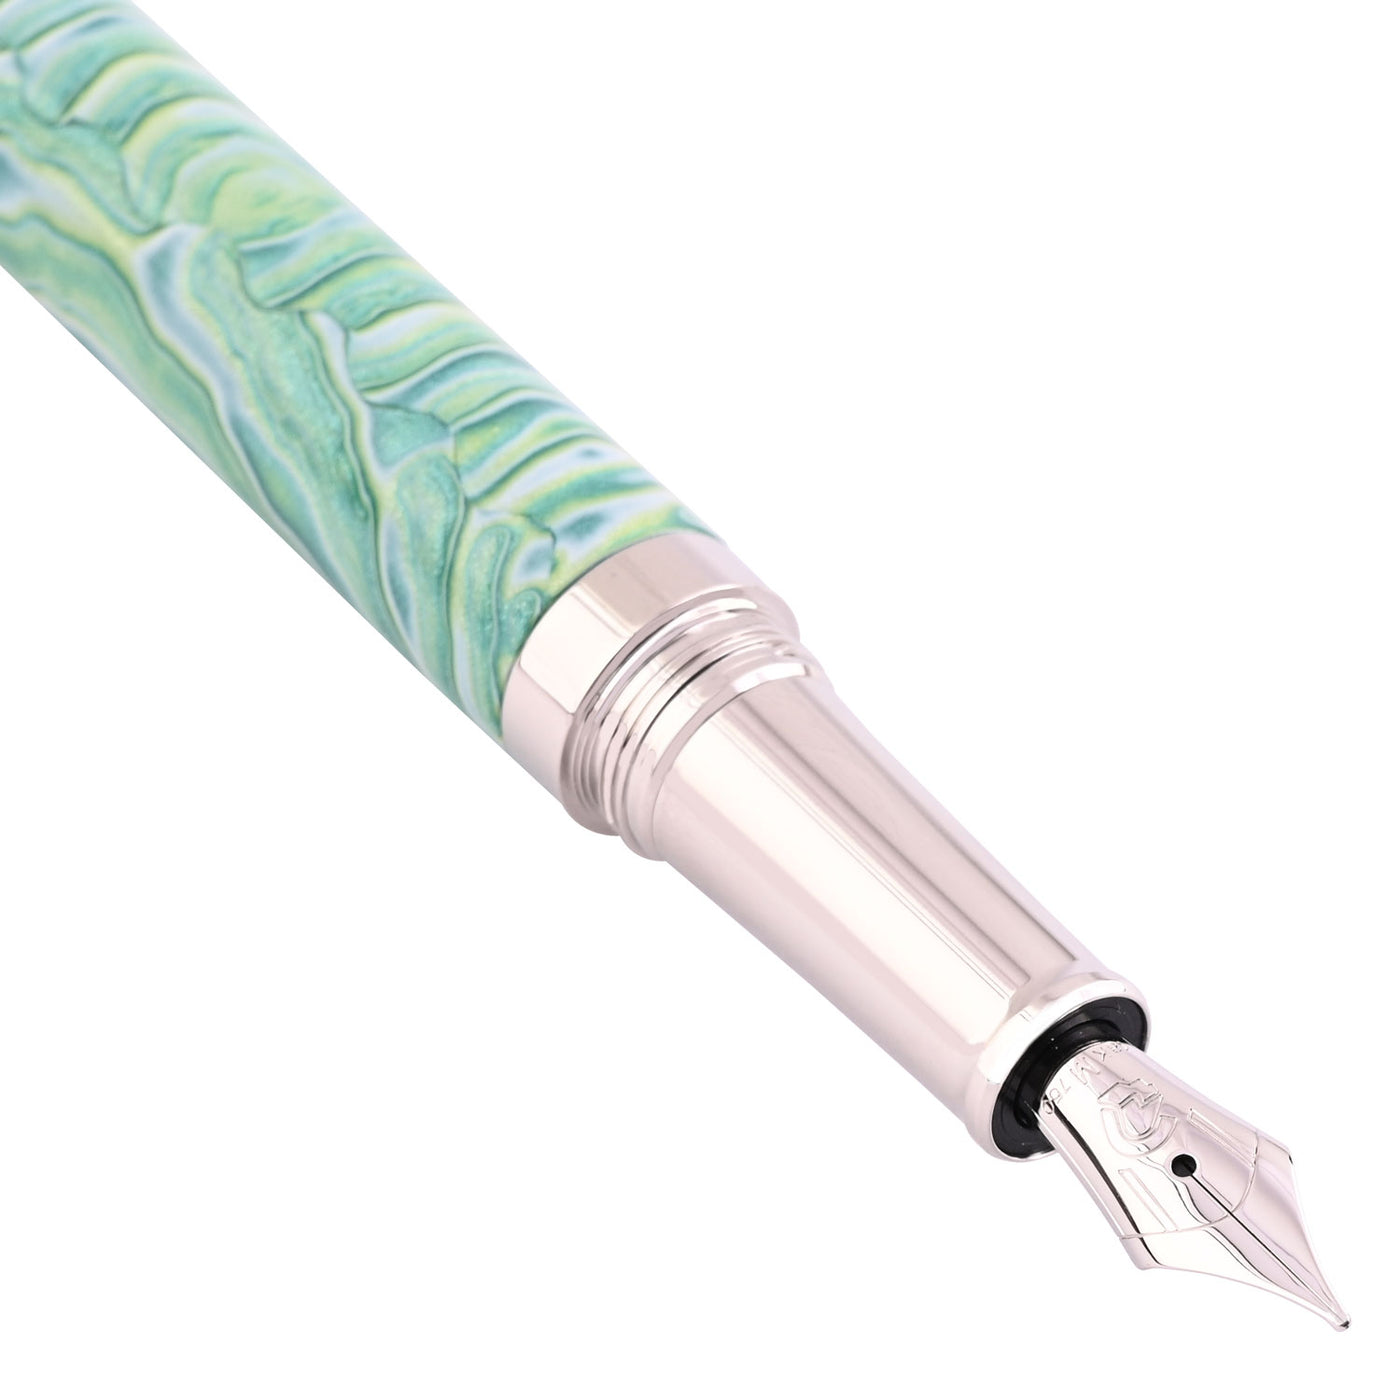 Staedtler Premium Pen of the Season Fountain Pen - Green CT (Limited Edition) 2